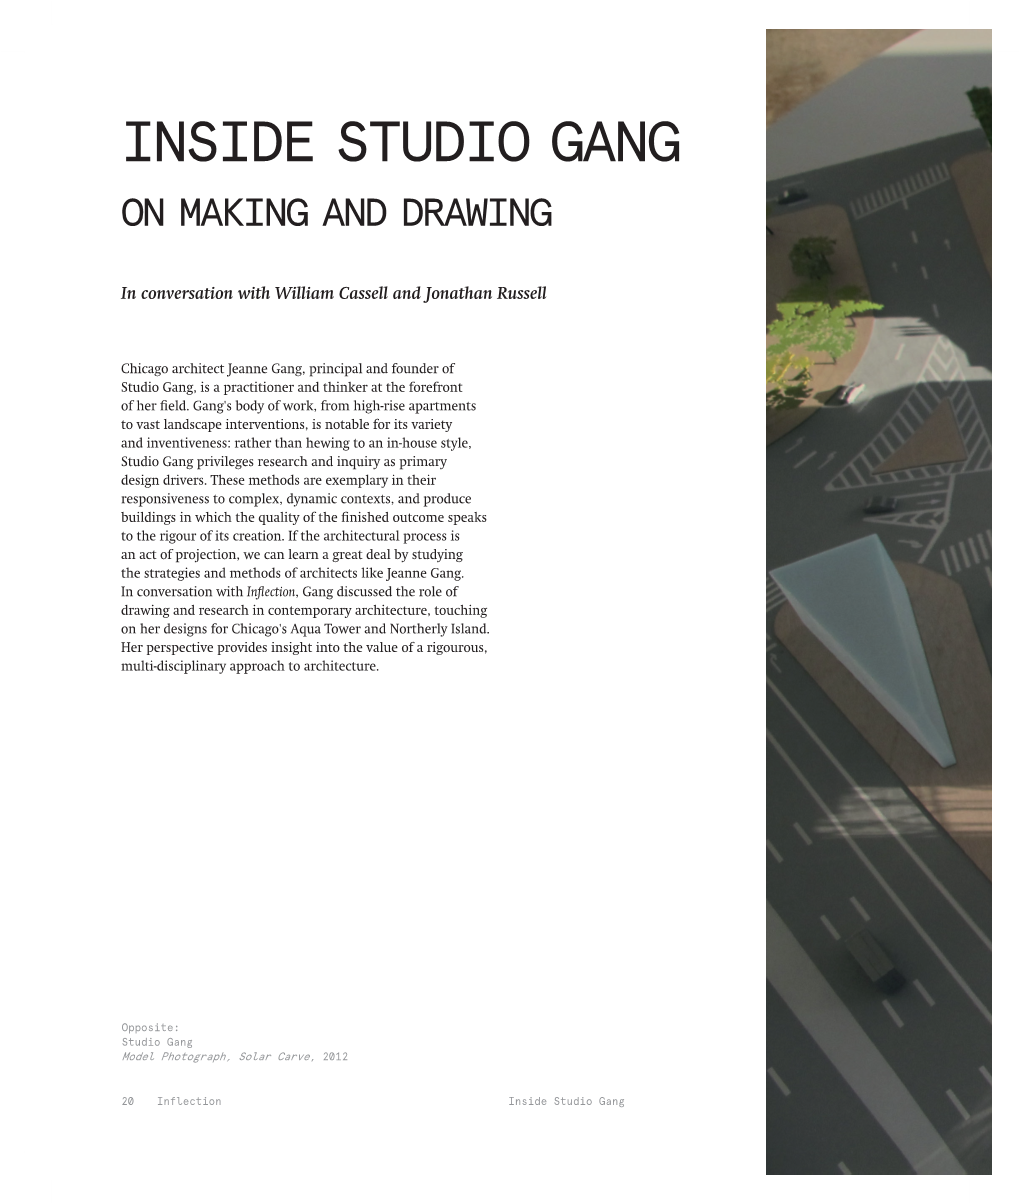 Inside Studio Gang on Making and Drawing